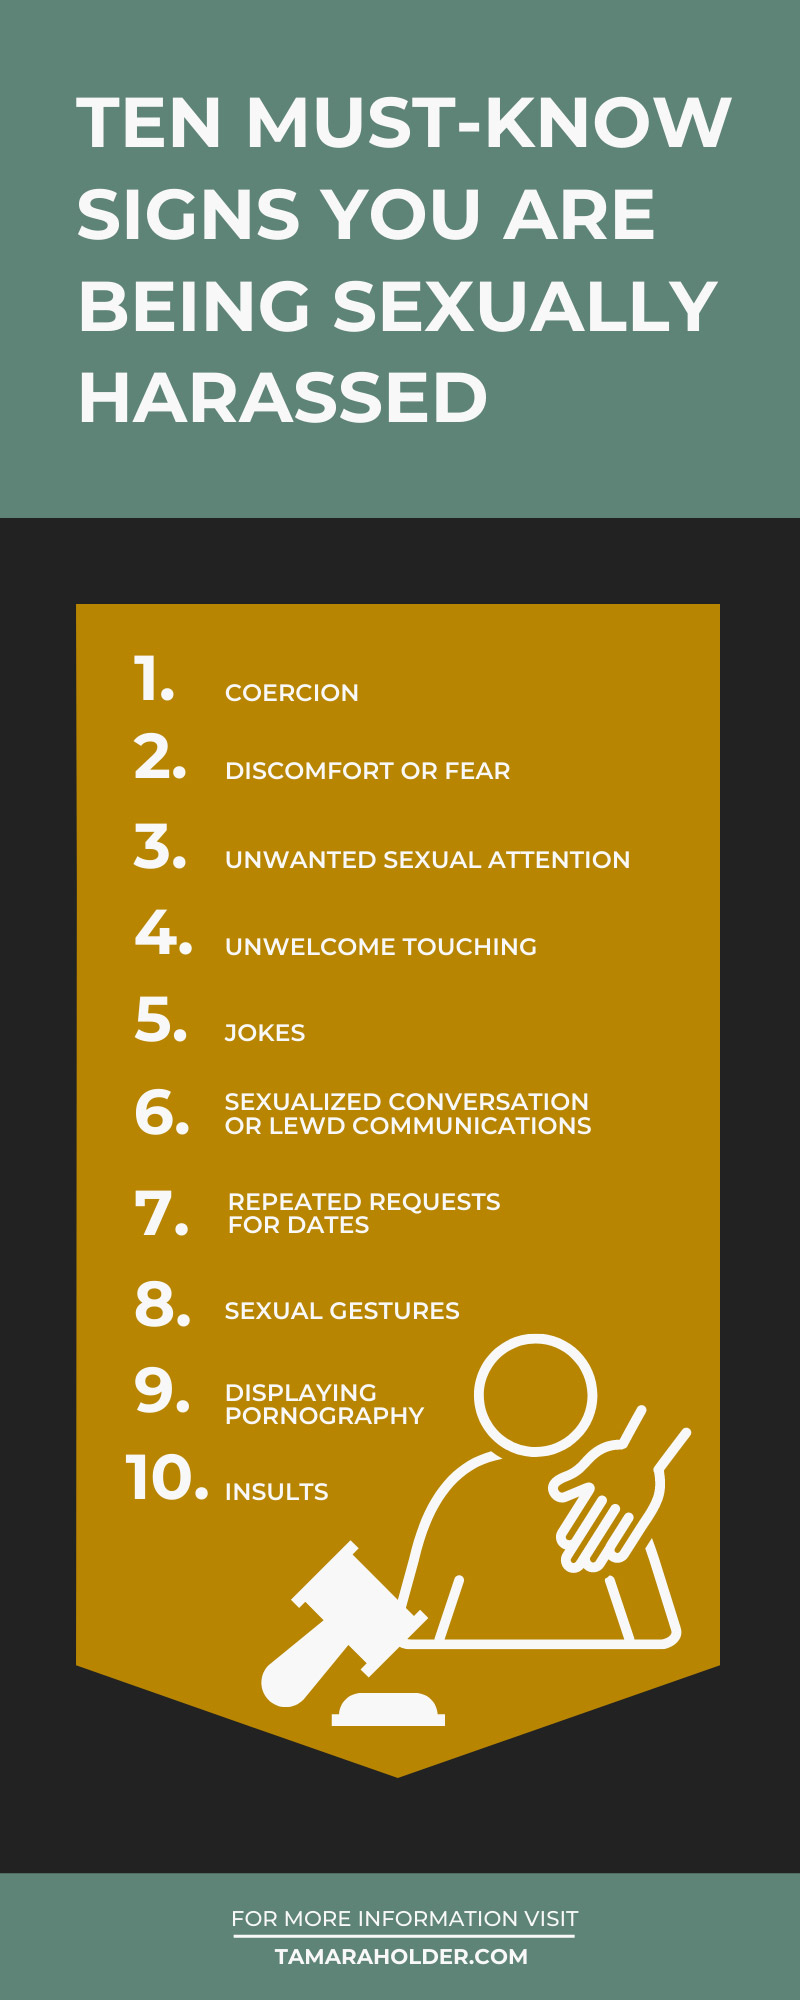 Ten Must-Know Signs You Are Being Sexually Harassed